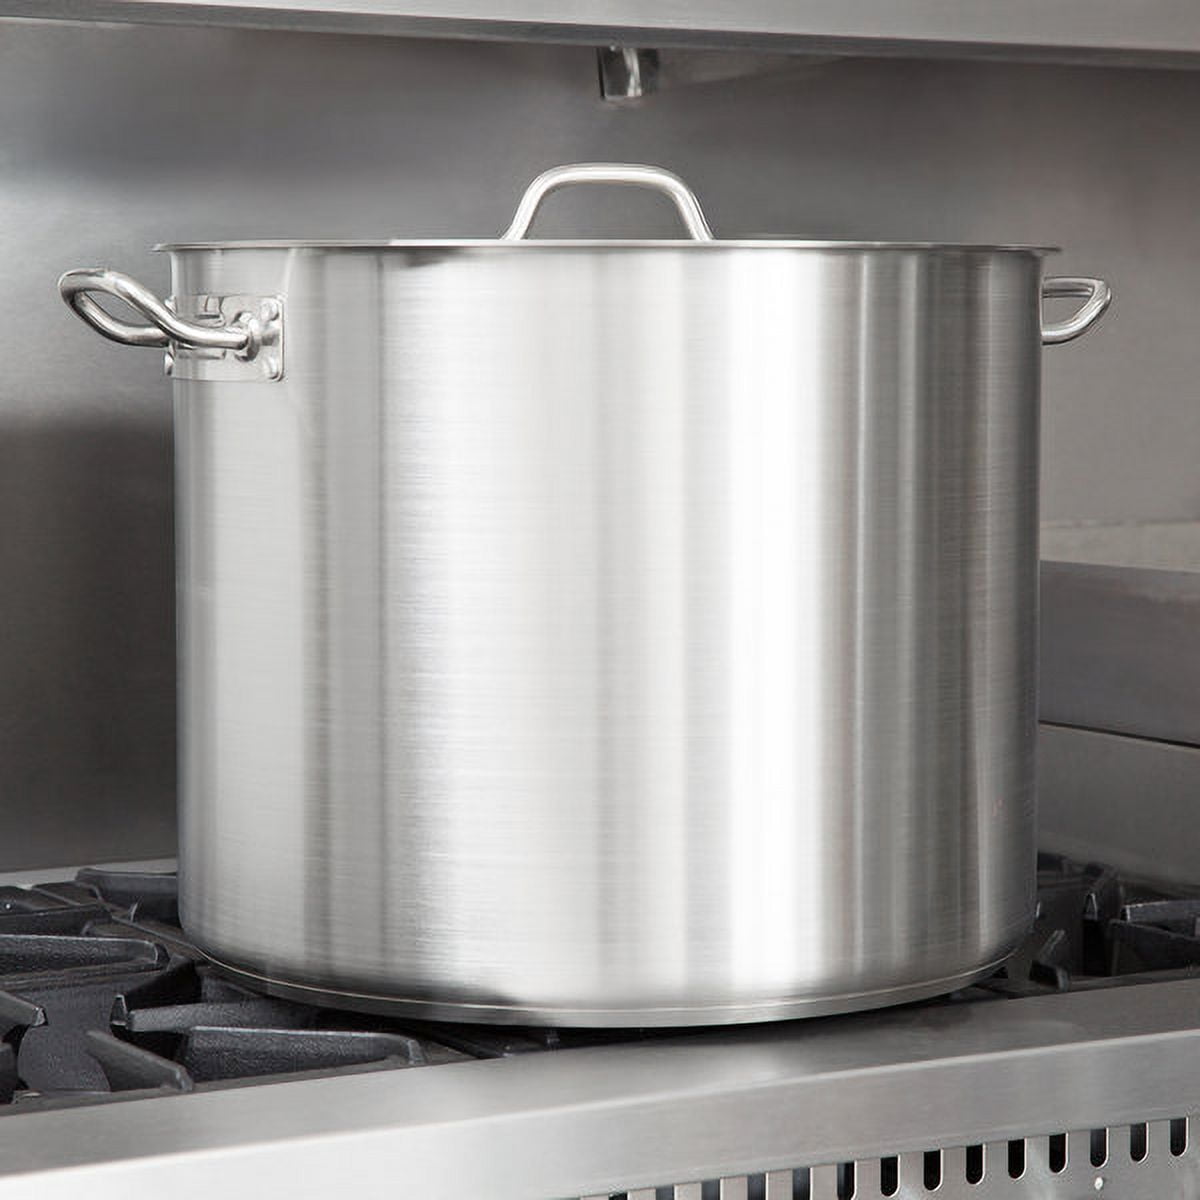 Vigor SS1 Series 8 Qt. Heavy-Duty Stainless Steel Aluminum-Clad Stock Pot  with Cover